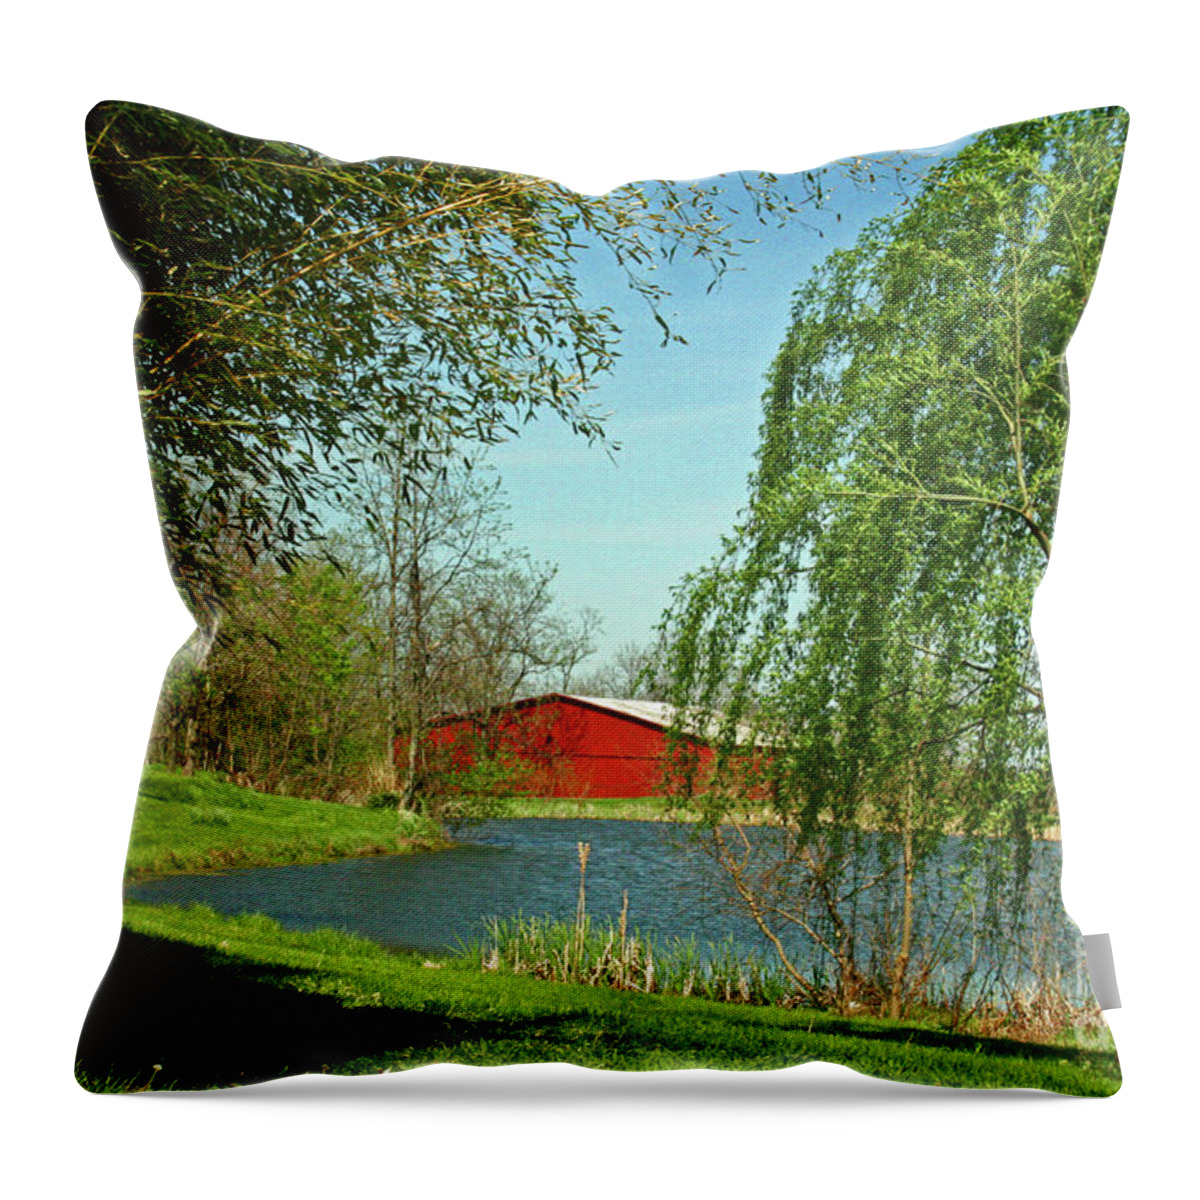 Red Barn Throw Pillow featuring the photograph Daydreamin' by Melissa Mim Rieman